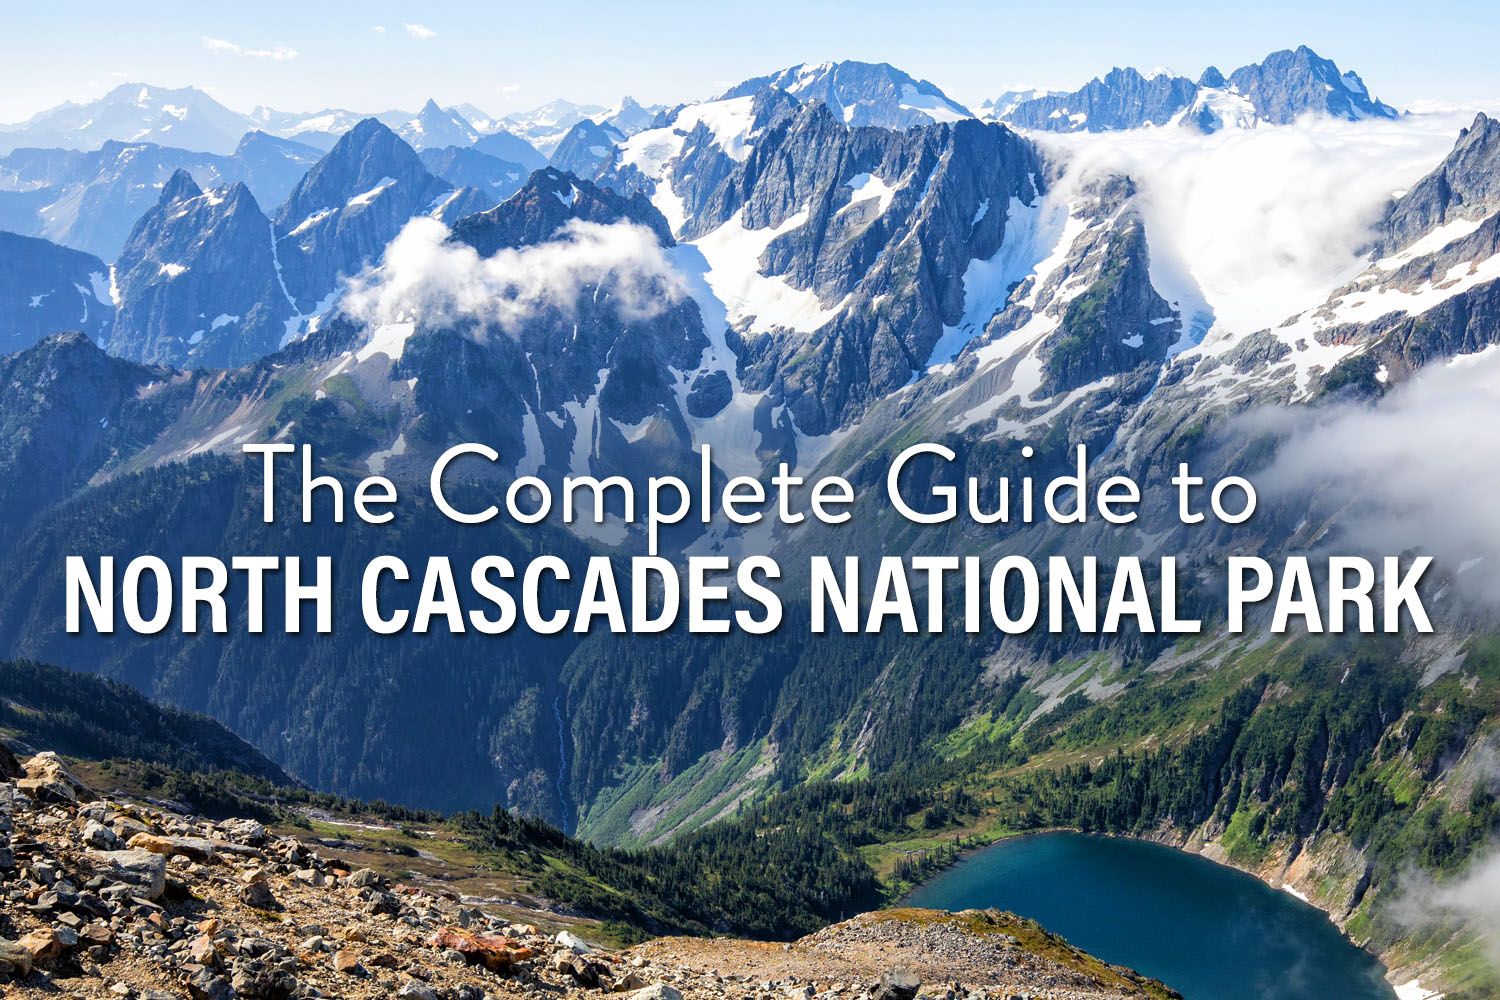 Guide to North Cascades NP